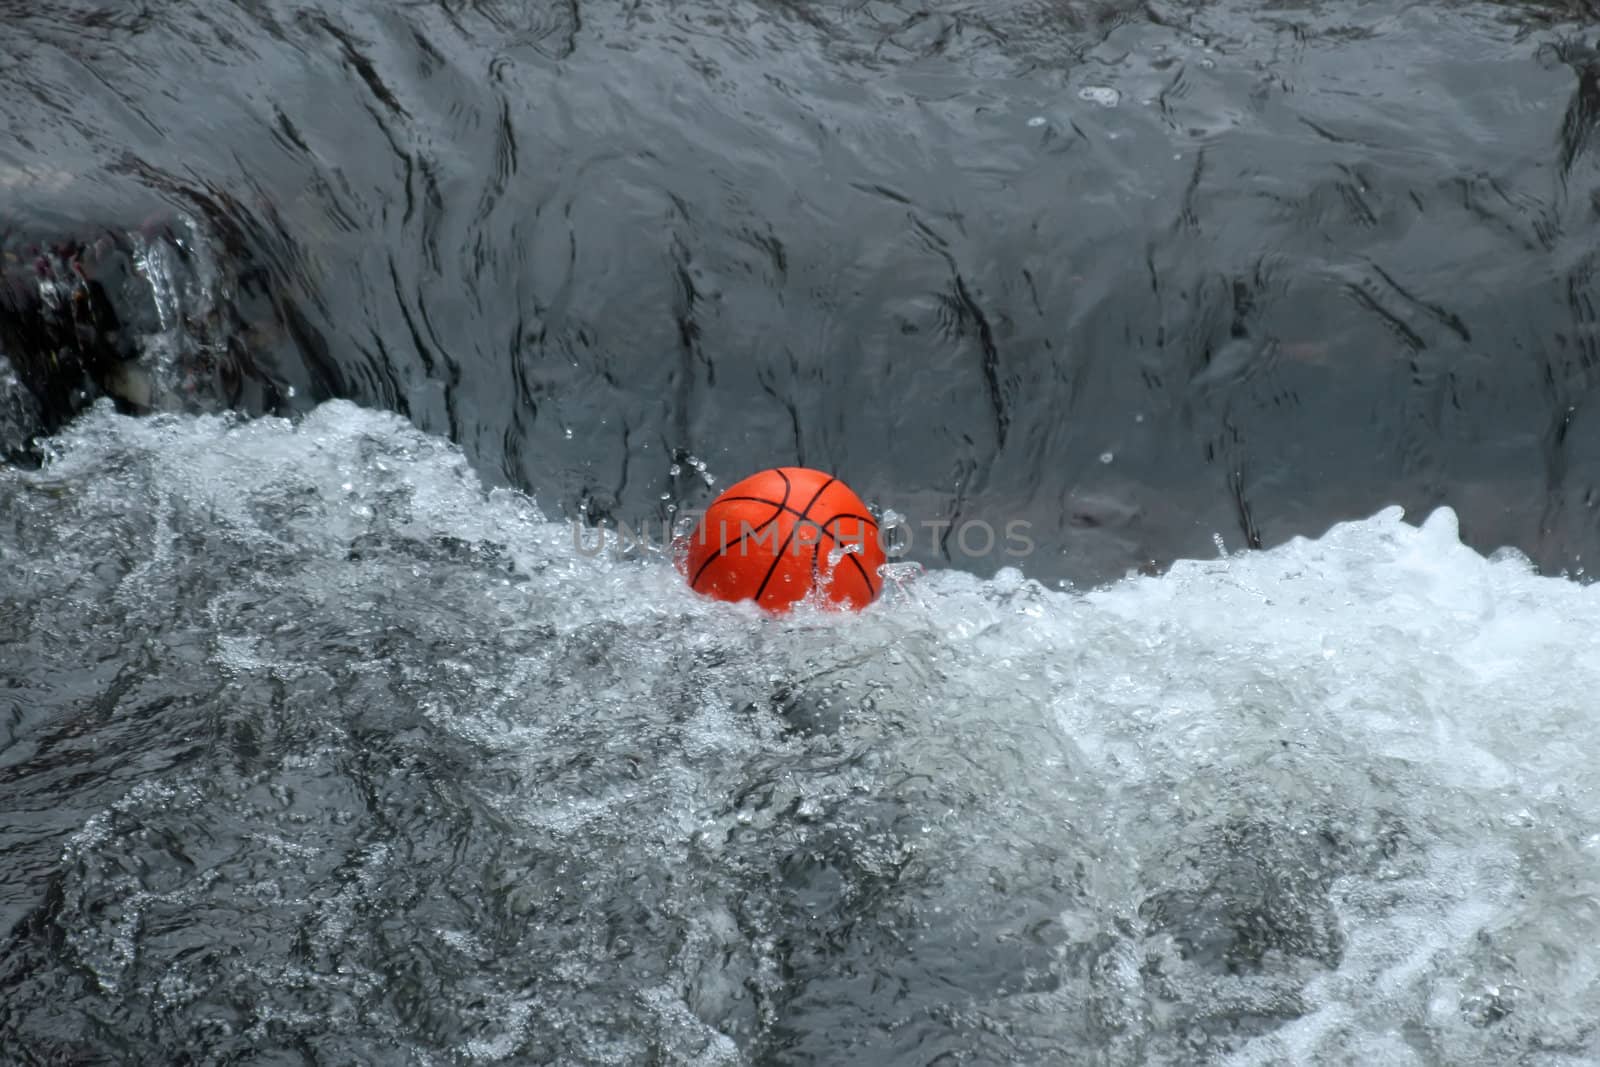 This image shows a basketball in a wild river